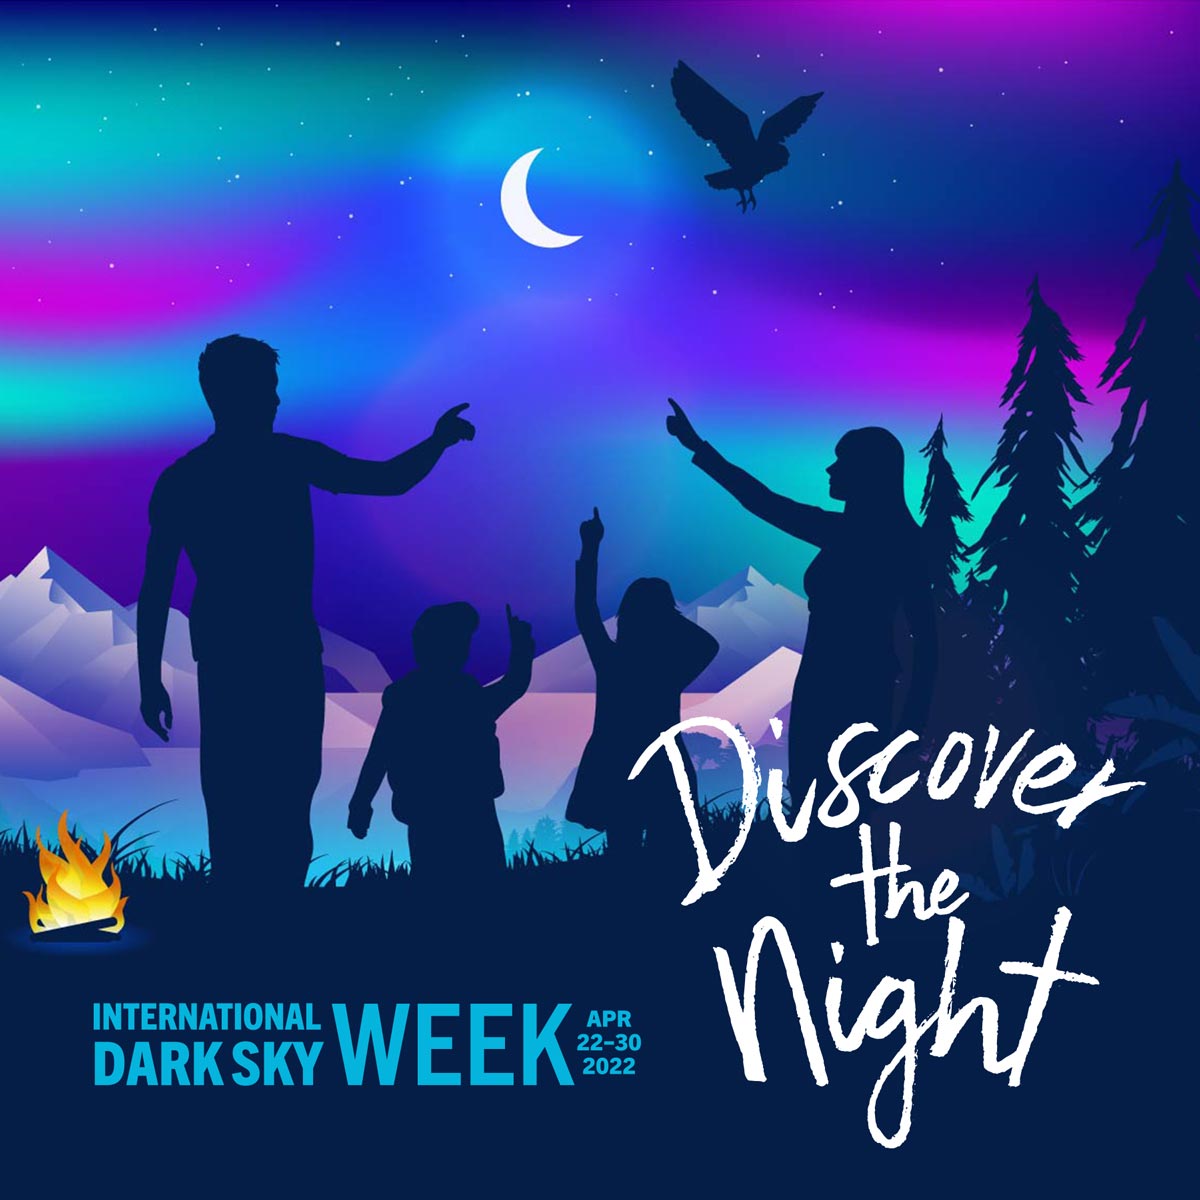 The countdown is on! There are just 8 days to go until International Dark Sky Week 2022 (April 22-30) kicks off. Be sure to explore the International Dark Sky Week website to find events and actions you can take to celebrate: idsw.darksky.org 

#IDSW2022 #DiscovertheNight